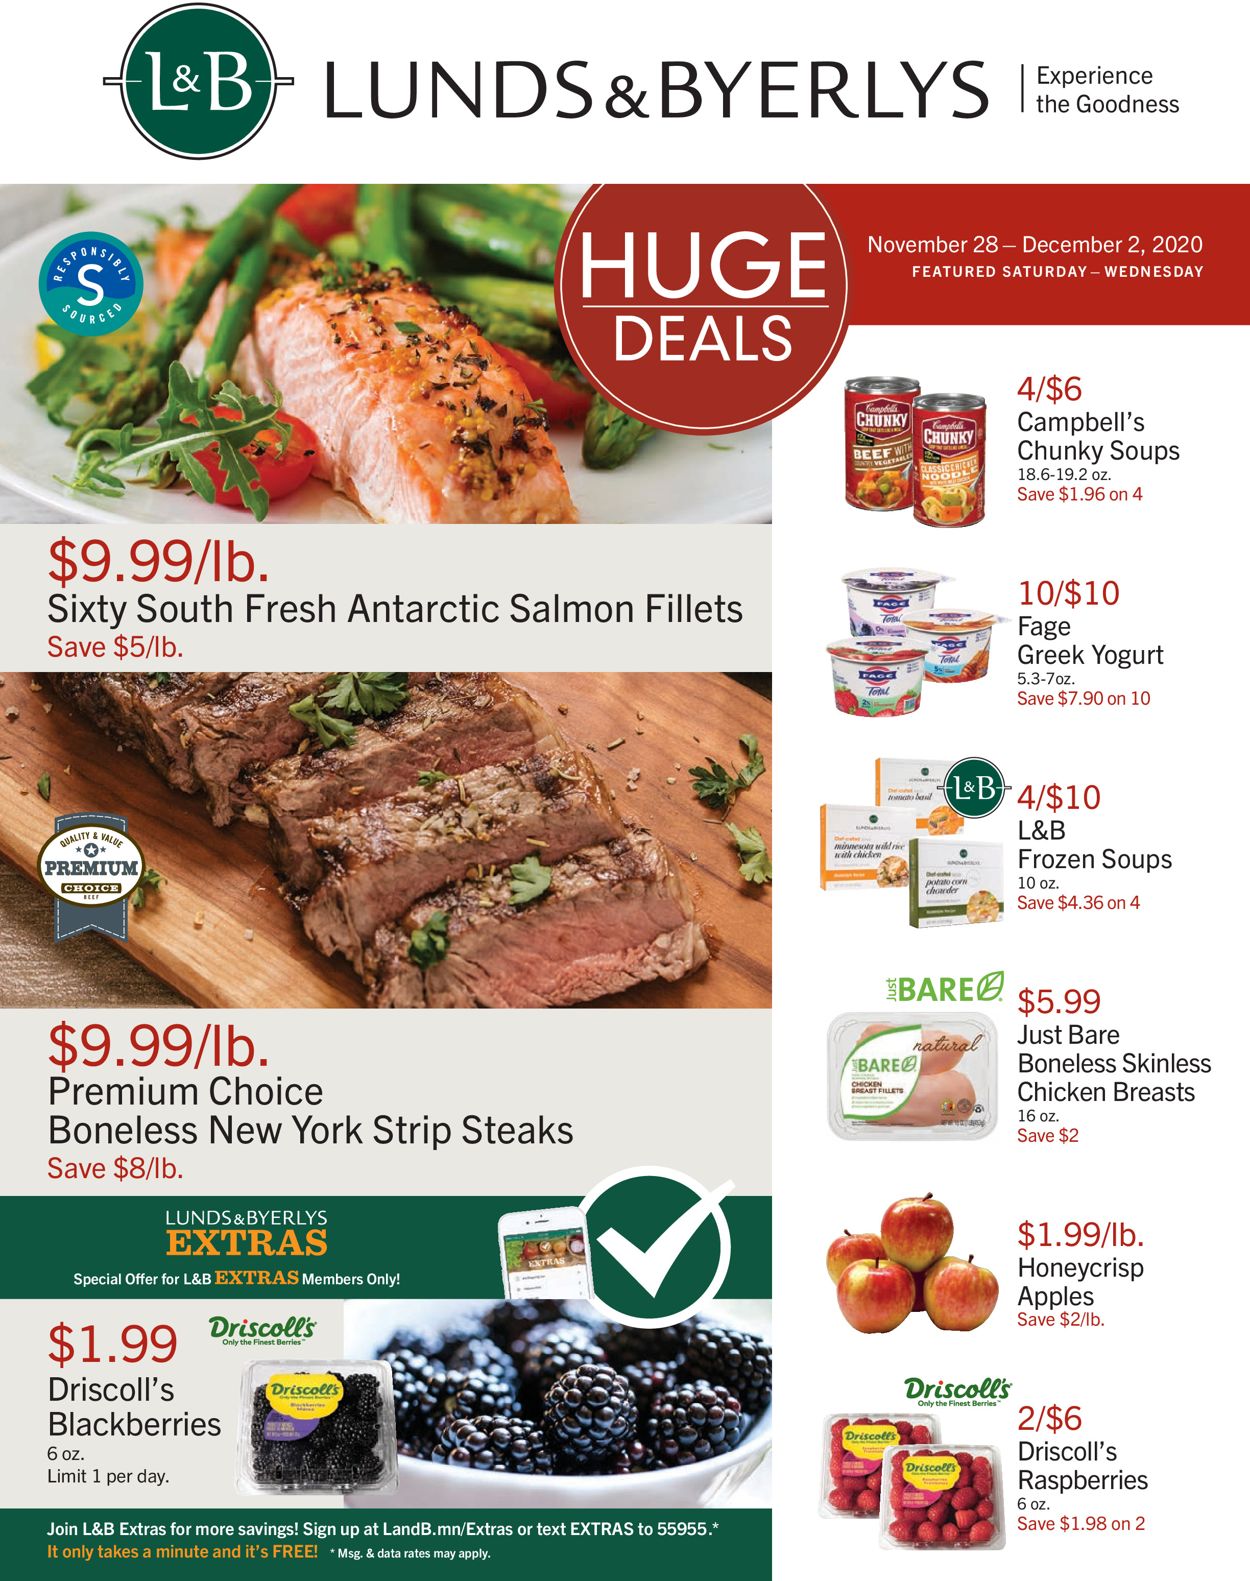 Lunds & Byerlys Cyber Monday 2020 Weekly Ad Circular - valid 11/26-12/02/2020